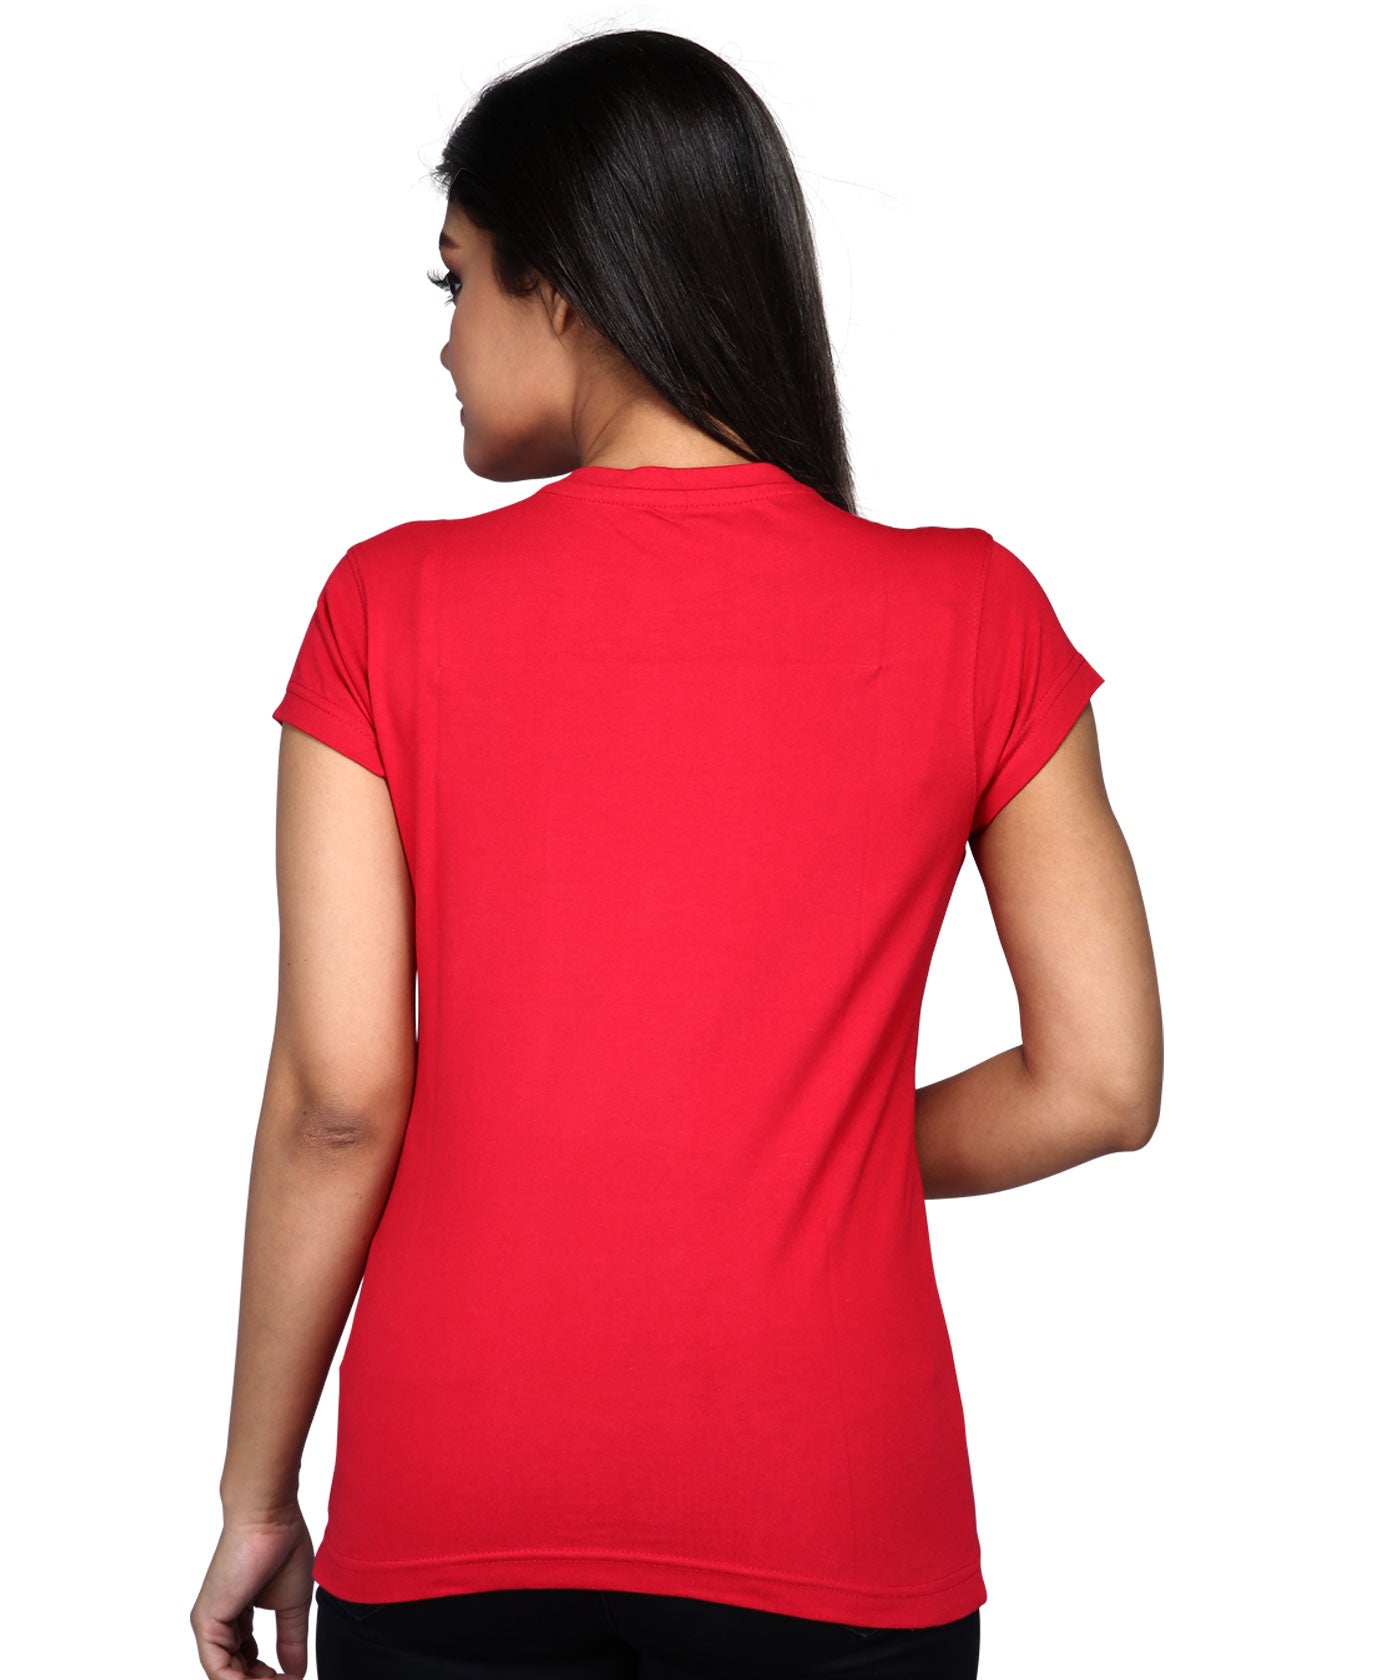 Double Line Border - Block Print Tees for Women - Red